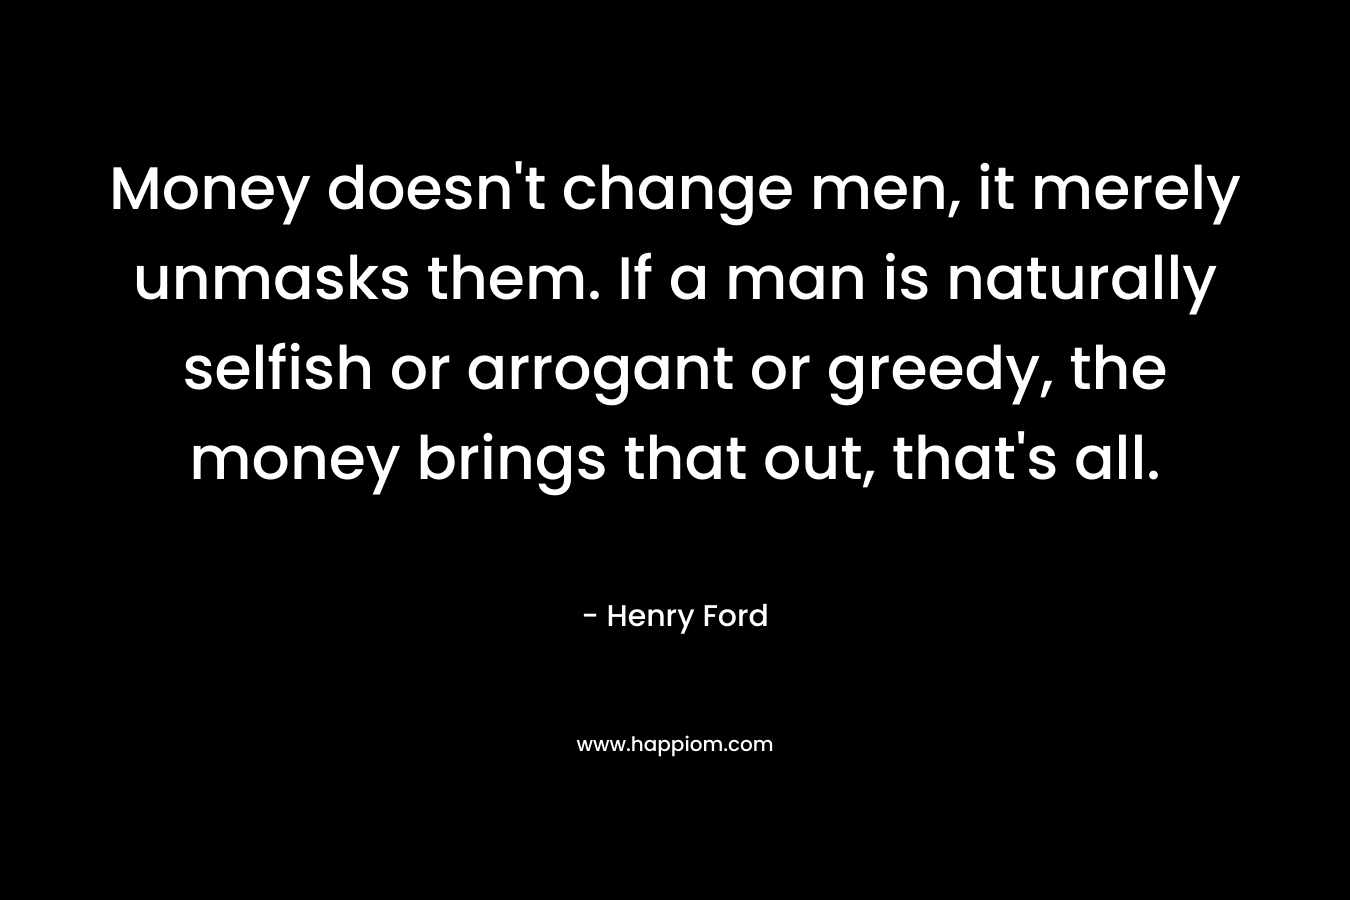 Money doesn’t change men, it merely unmasks them. If a man is naturally selfish or arrogant or greedy, the money brings that out, that’s all. – Henry Ford